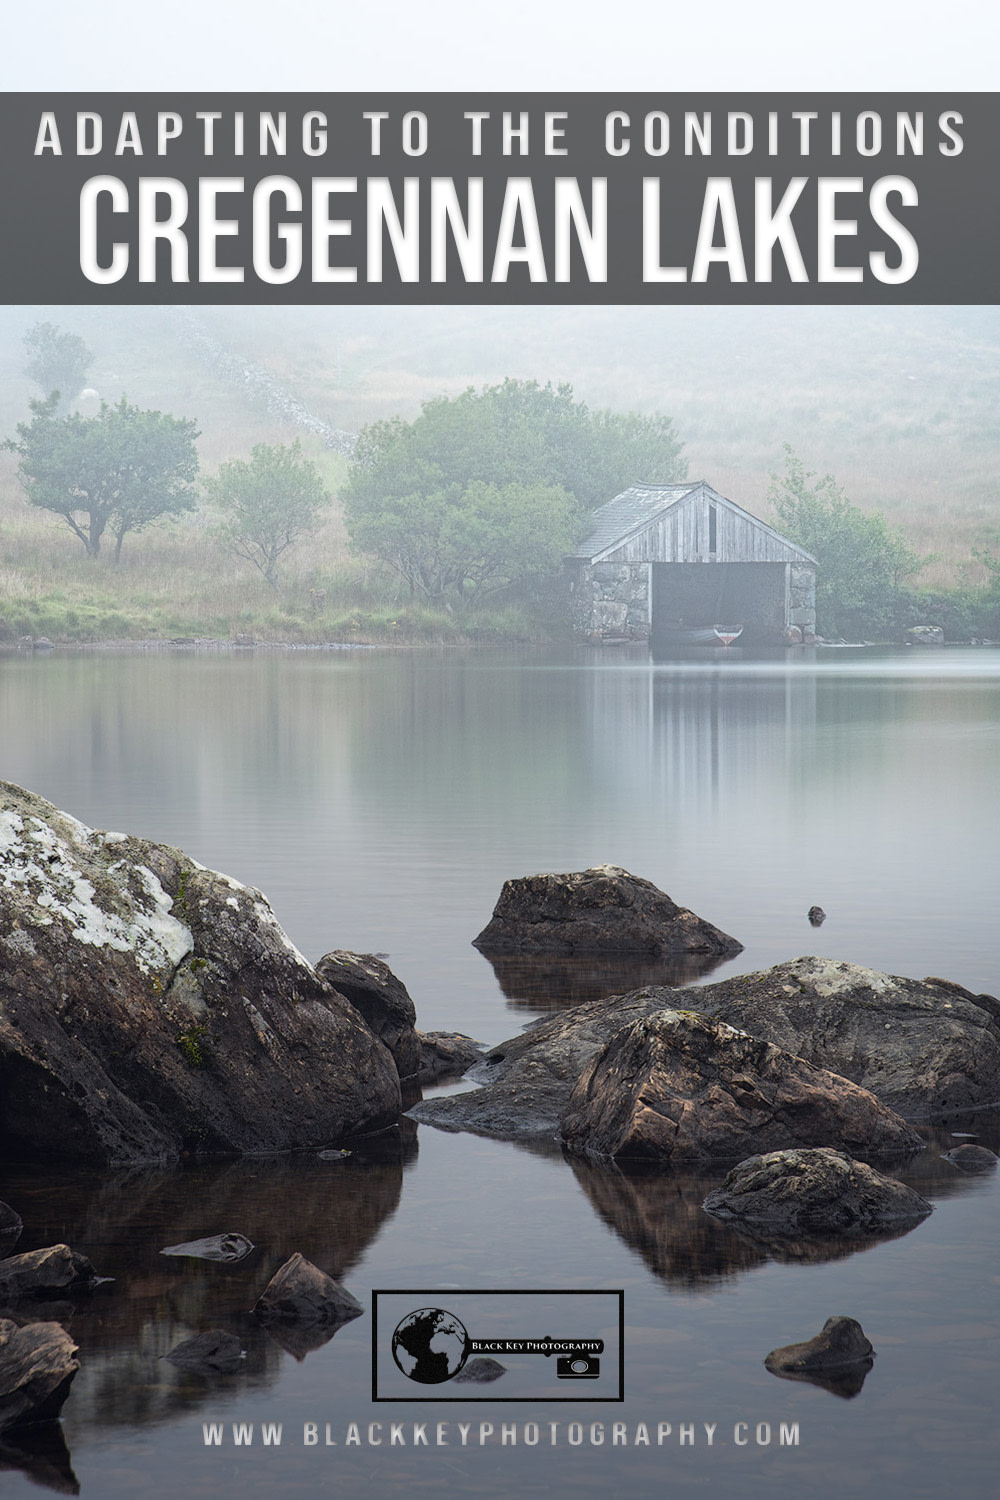 Cregennan Lakes adapting to the conditions